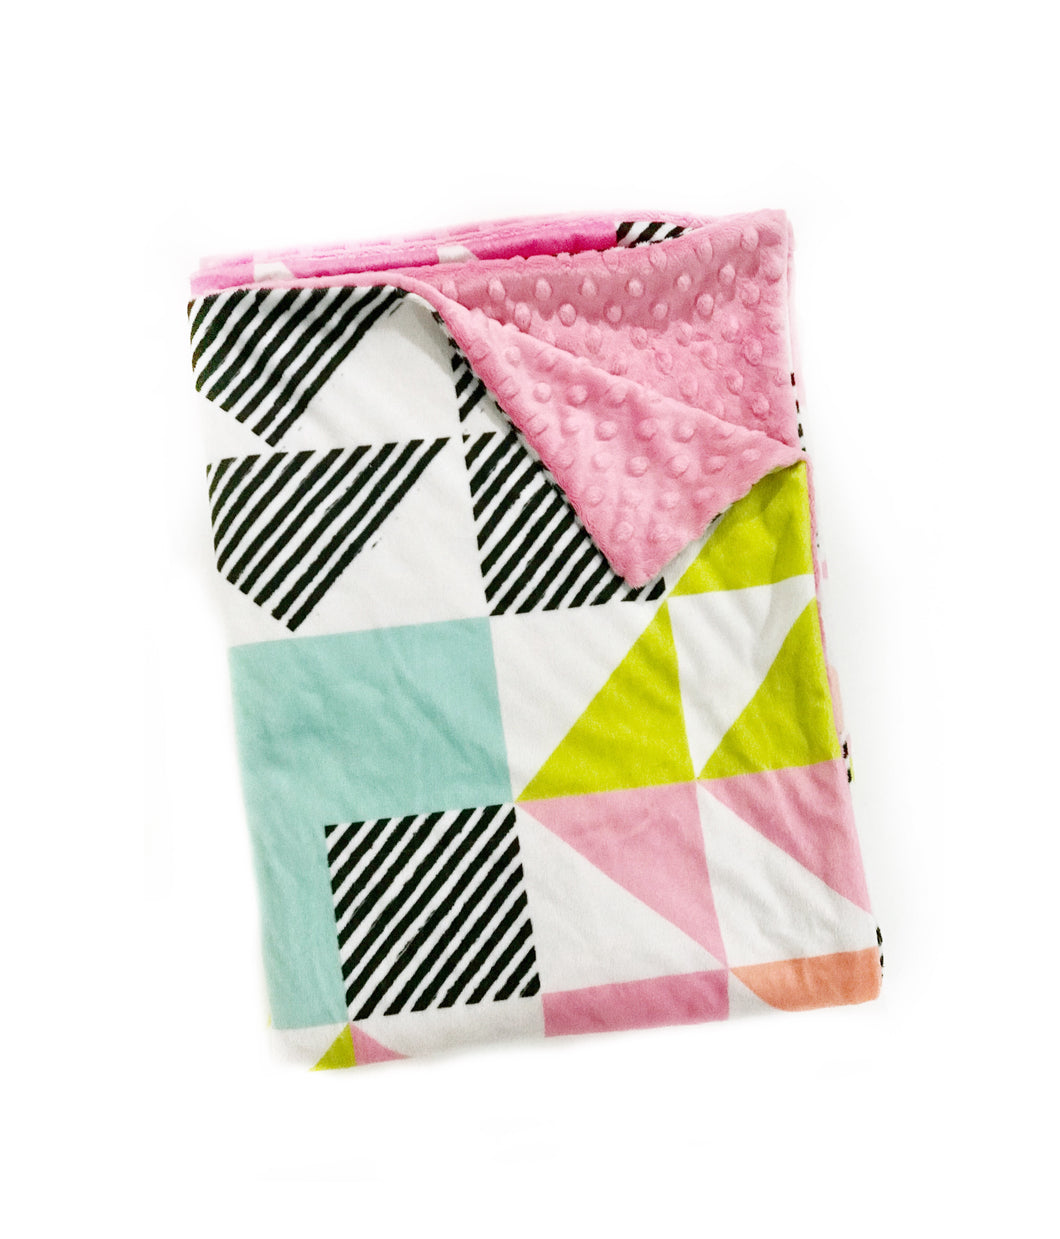 SALE // Pink and Aqua Triangle Puzzlecloth Minky Blanket // Child Blanket Size